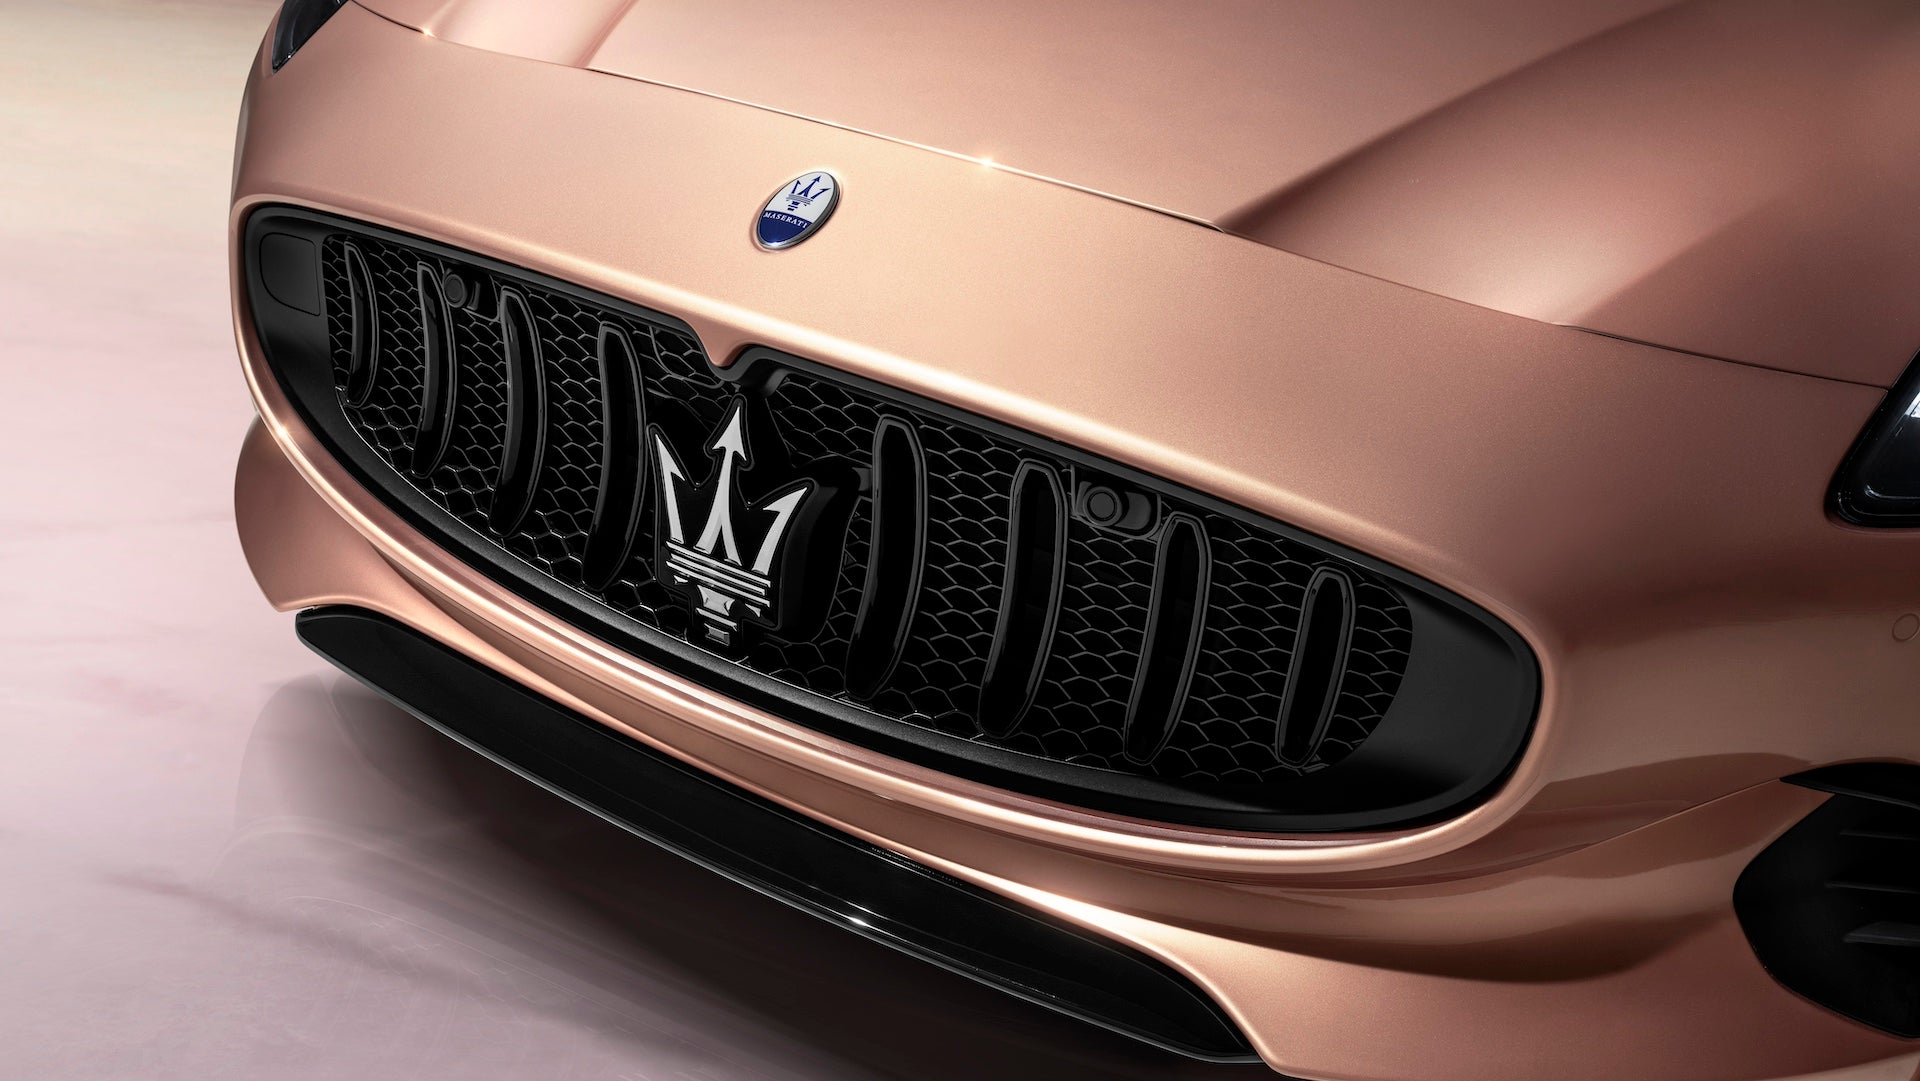 Maserati clarifies that AI is utilized as a design tool, rather than a shortcut for cooling cars.